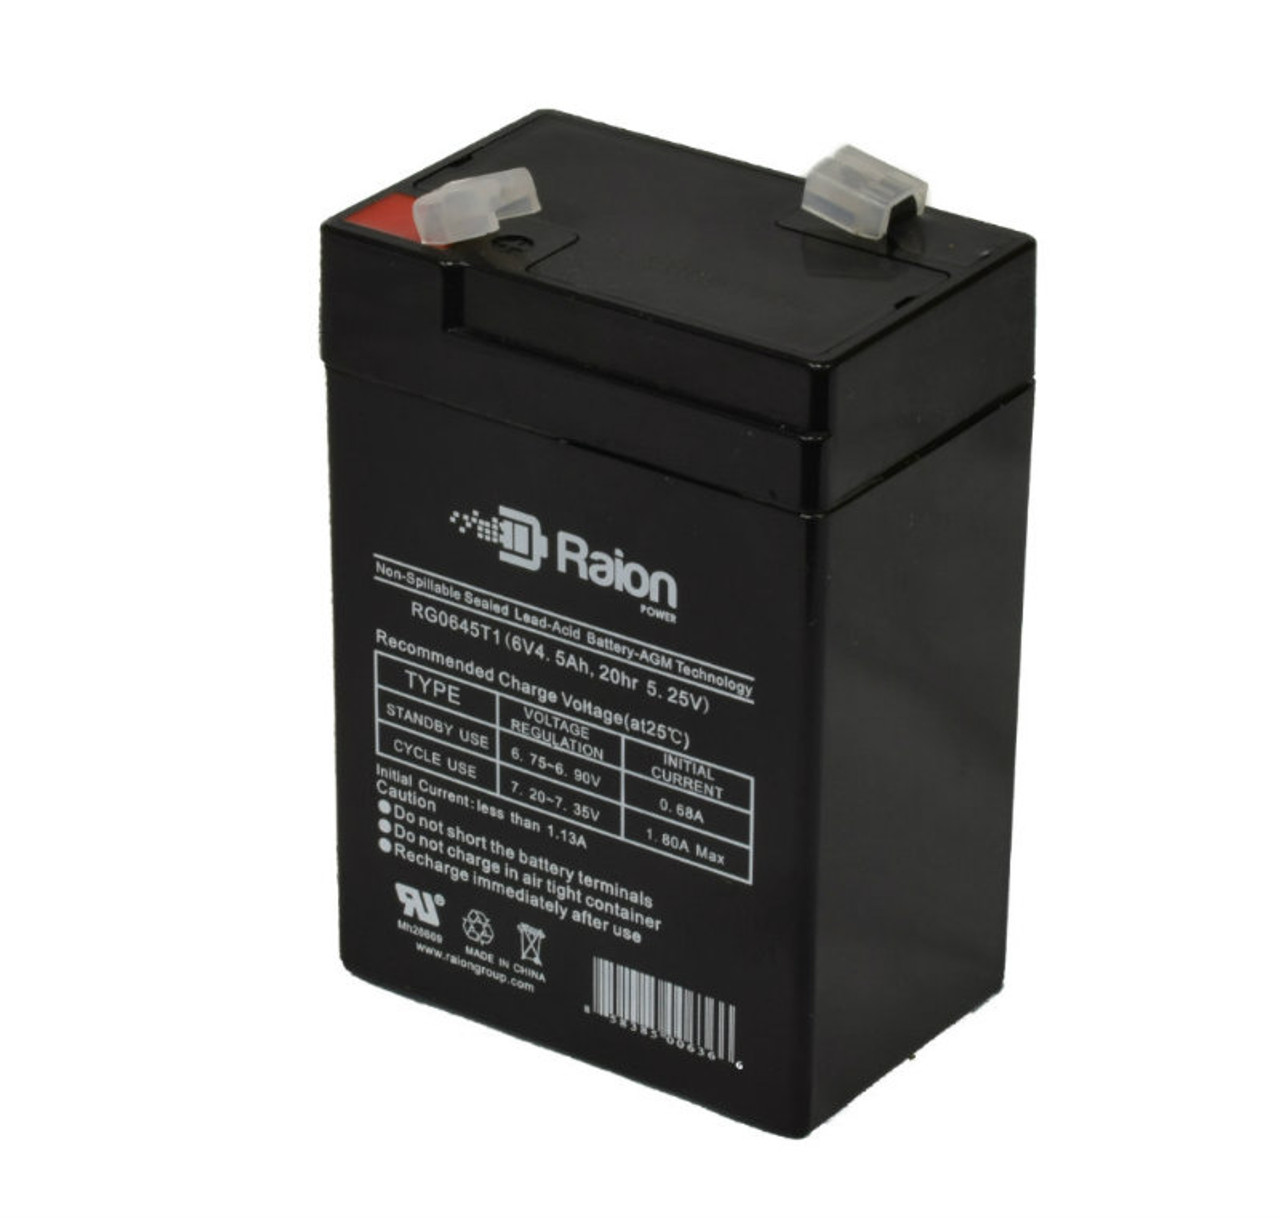 Raion Power RG0645T1 6V 4.5Ah Replacement Battery Cartridge for Trio Lighting TL930007